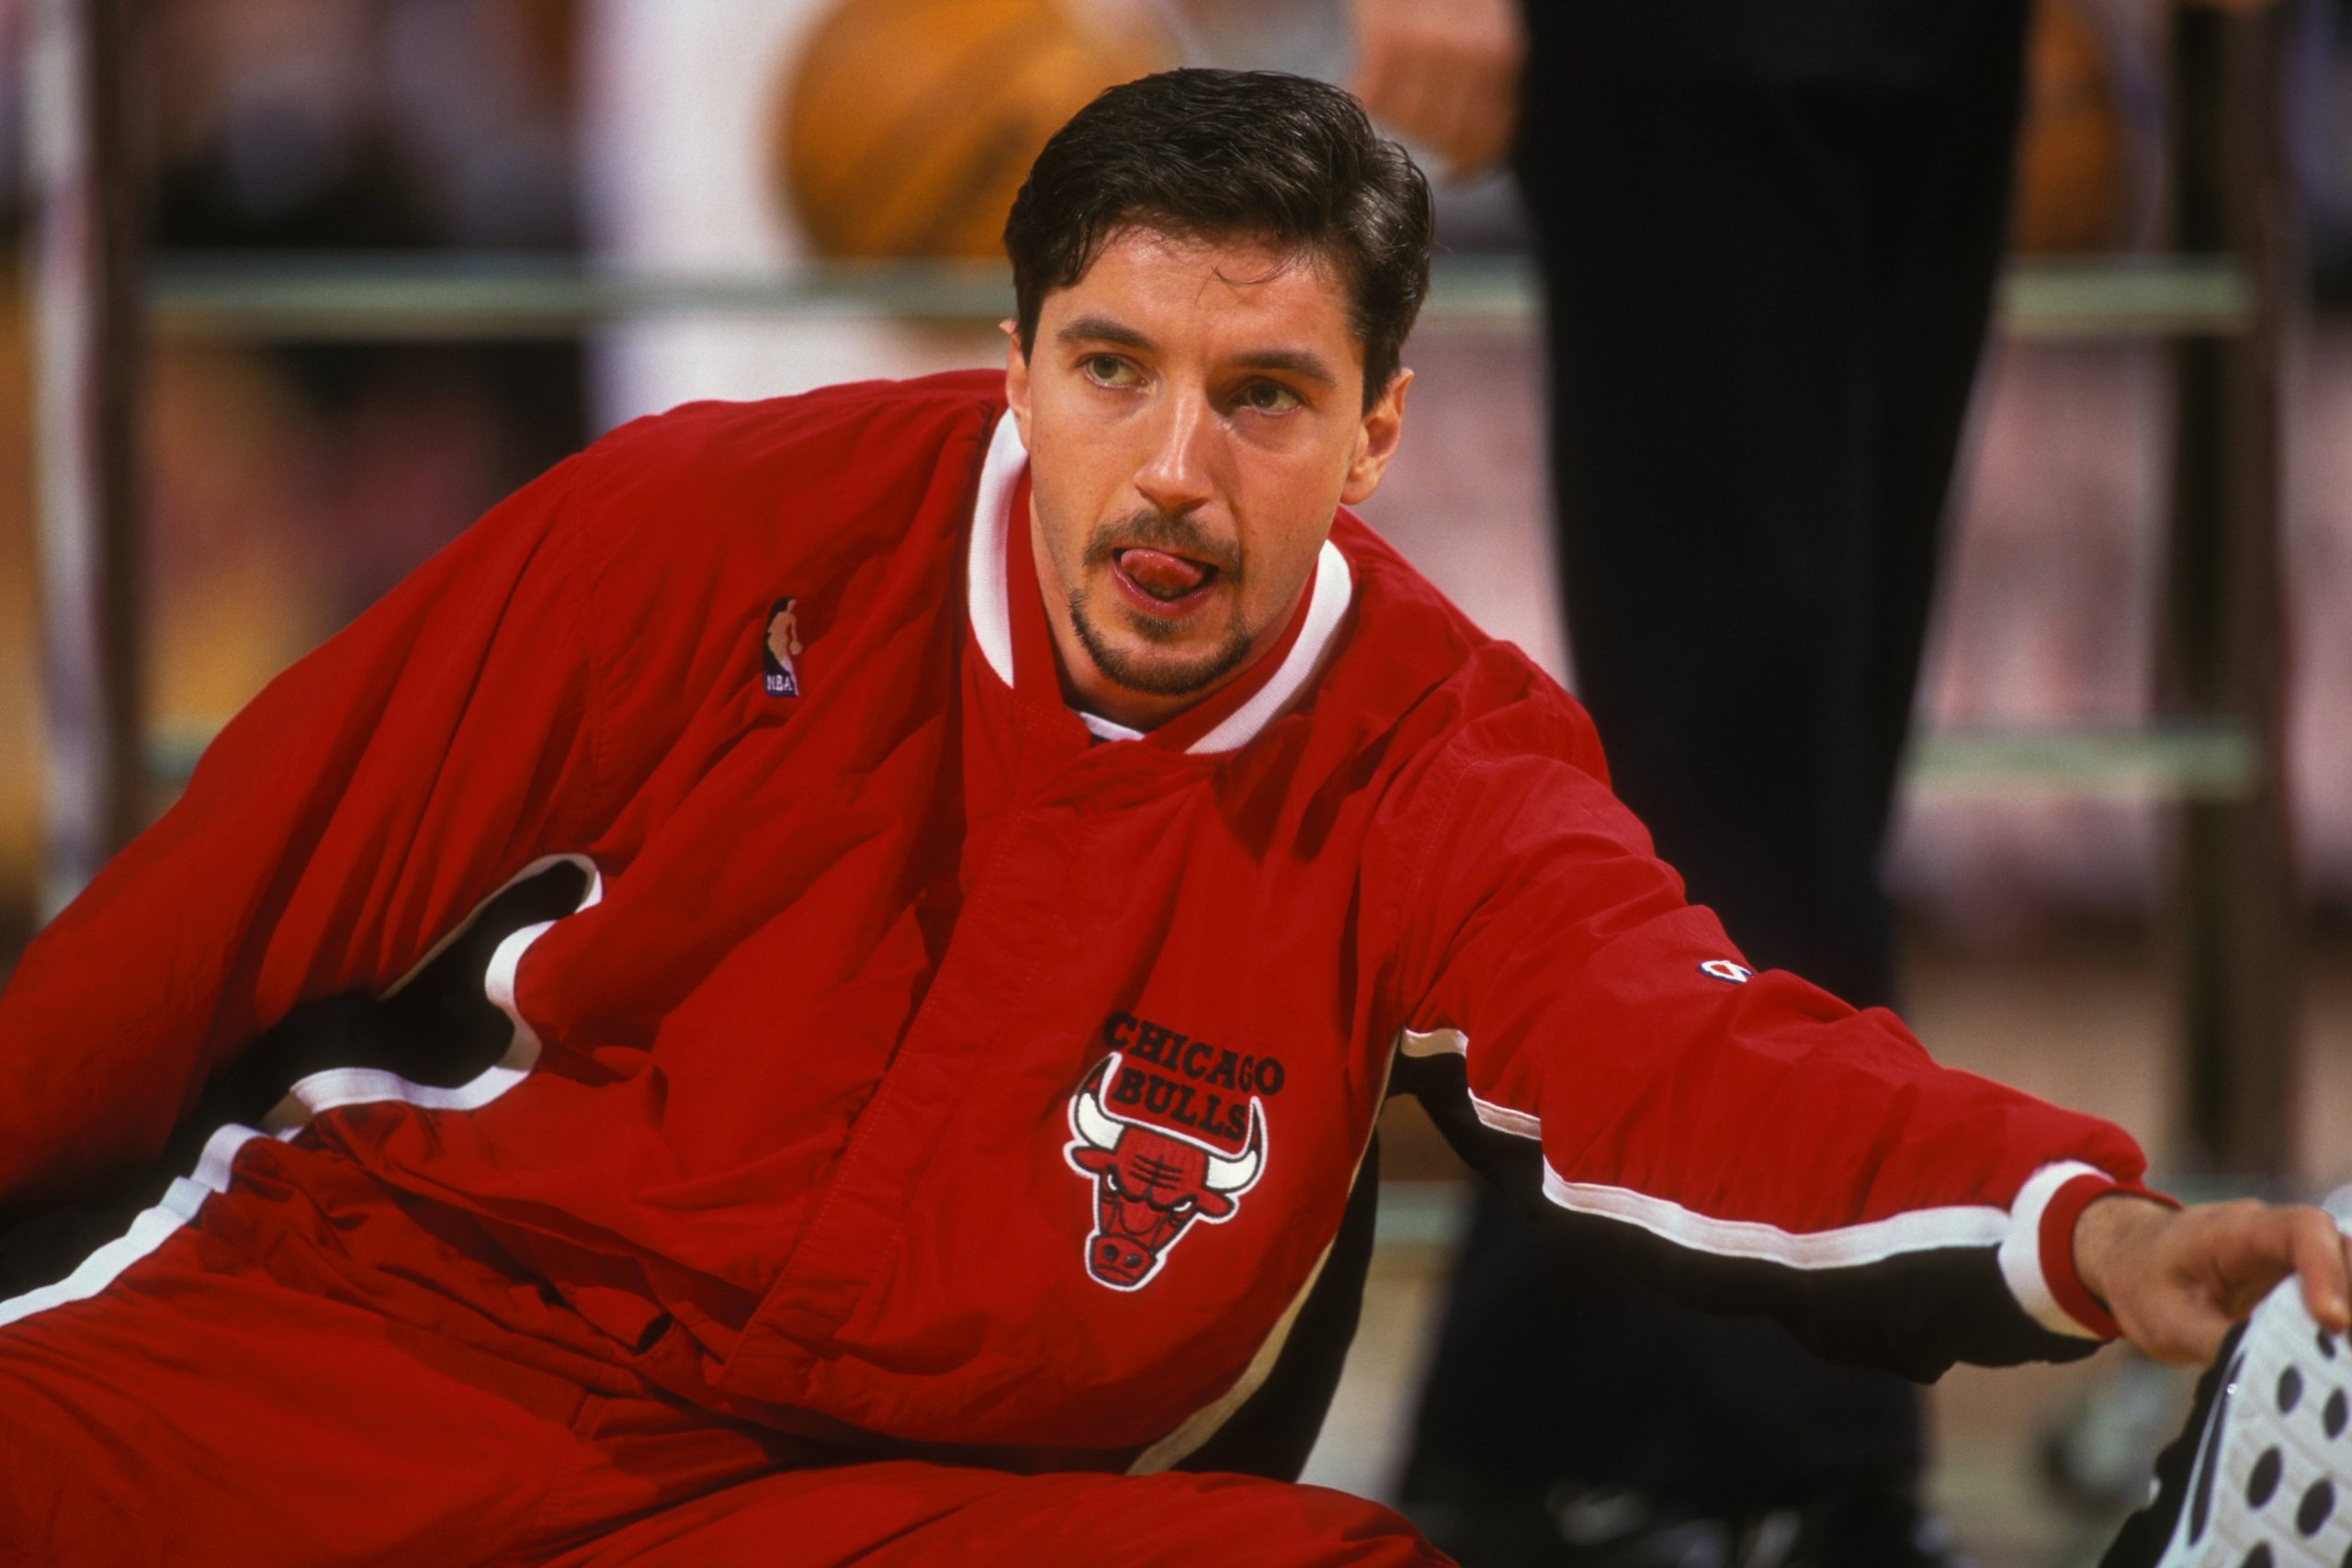 Toni Kukoc of the Chicago Bulls during a NBA basketball game against the Washington Bullets at USAir Arena on March 1, 1996.